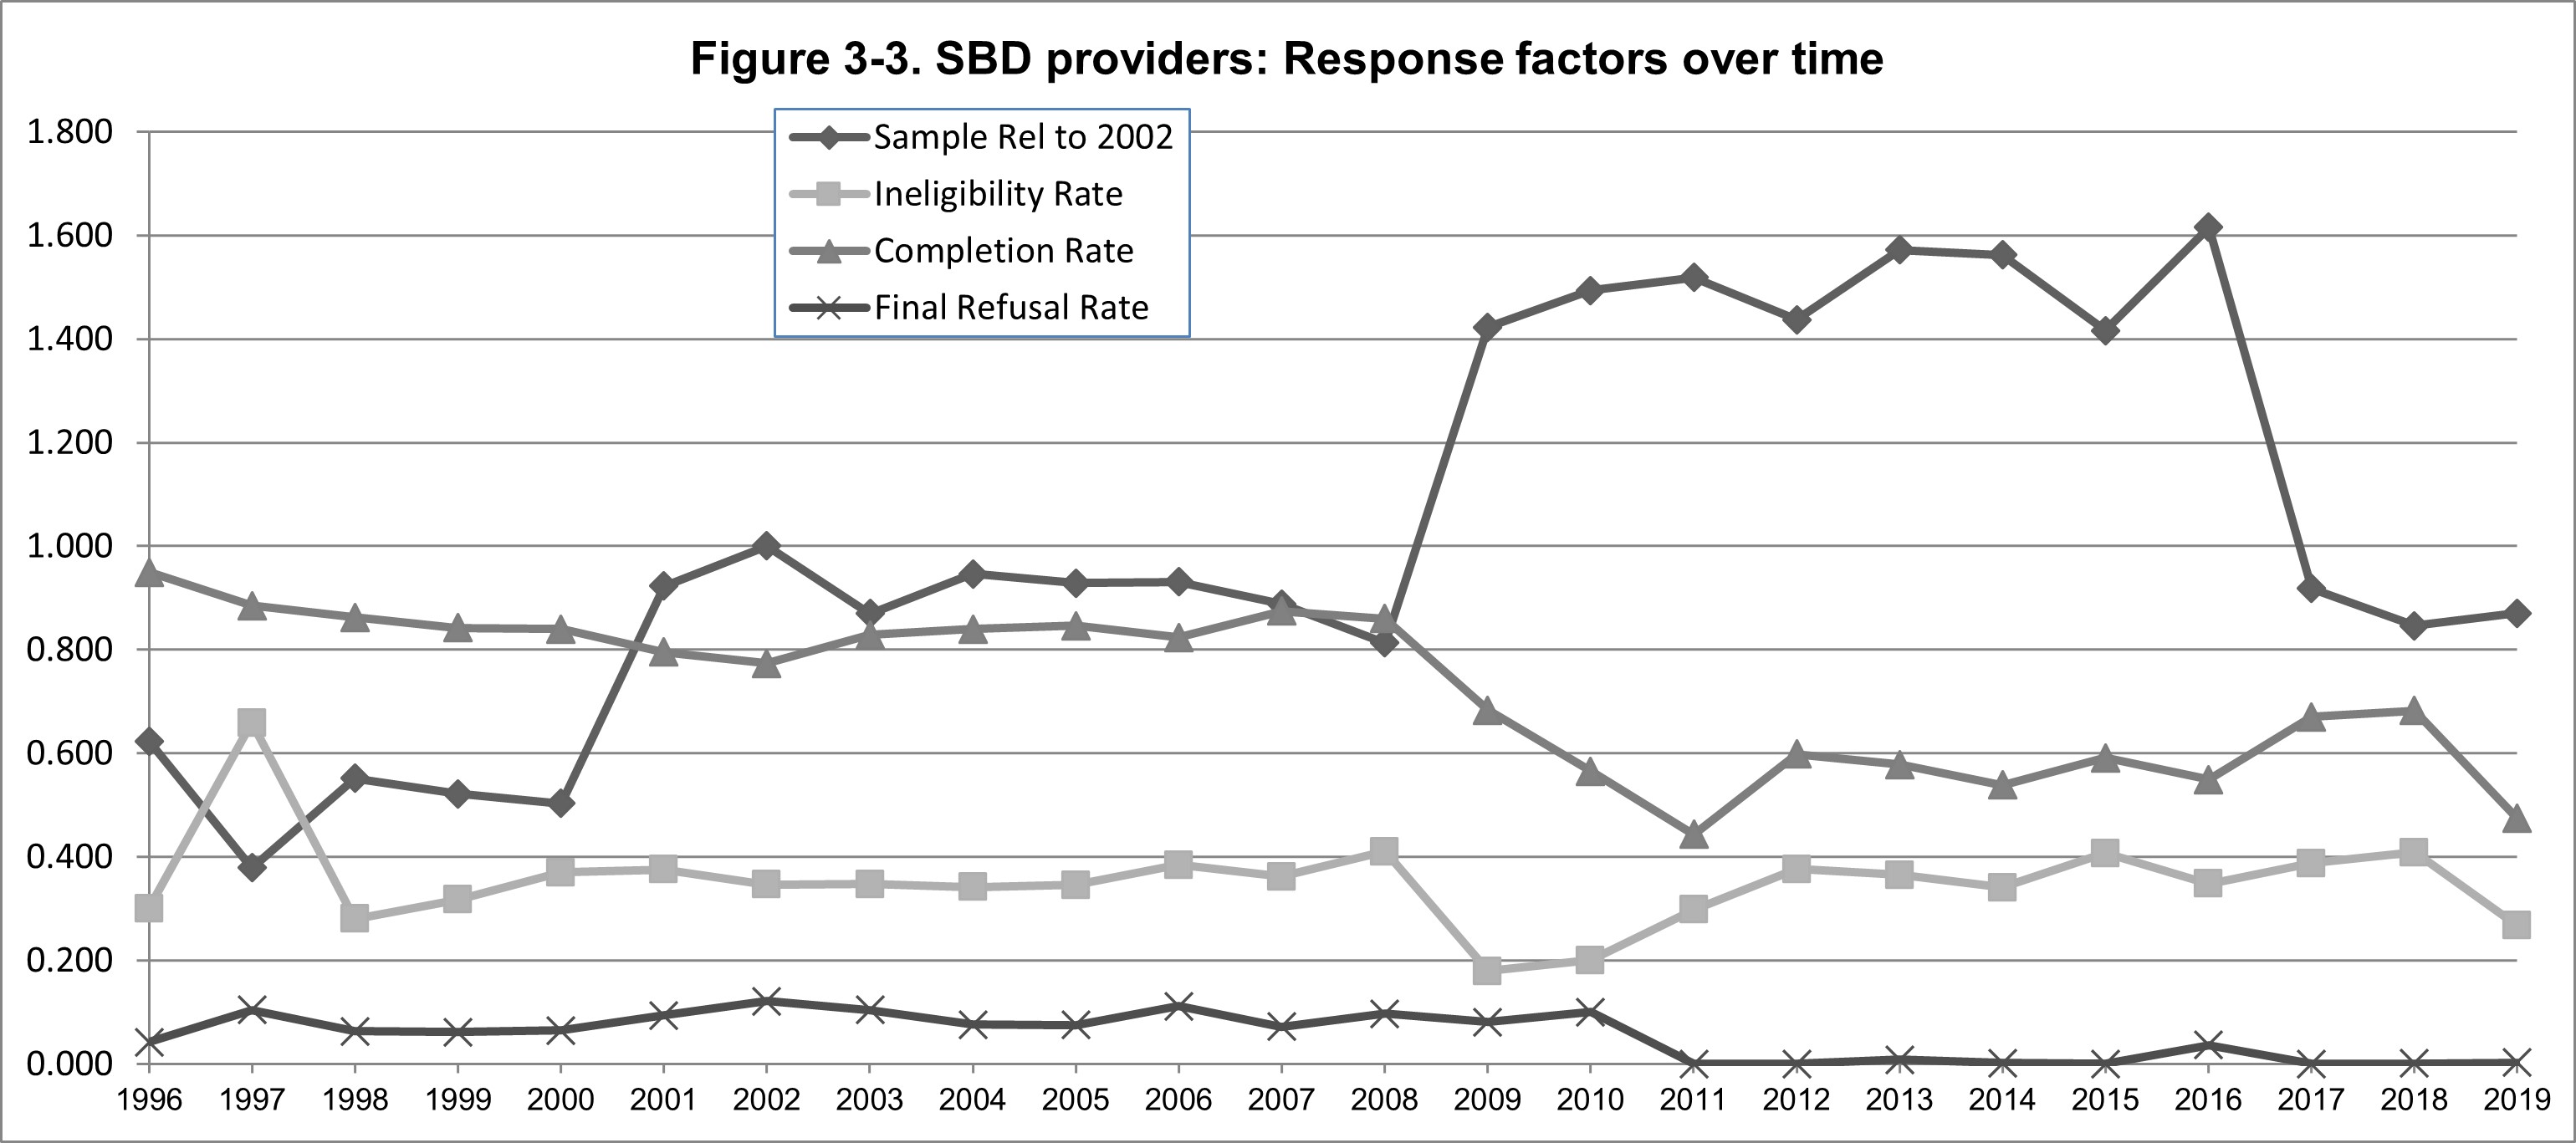 Image displaying response factors over time, from 1996 through 2019 for SBD providers